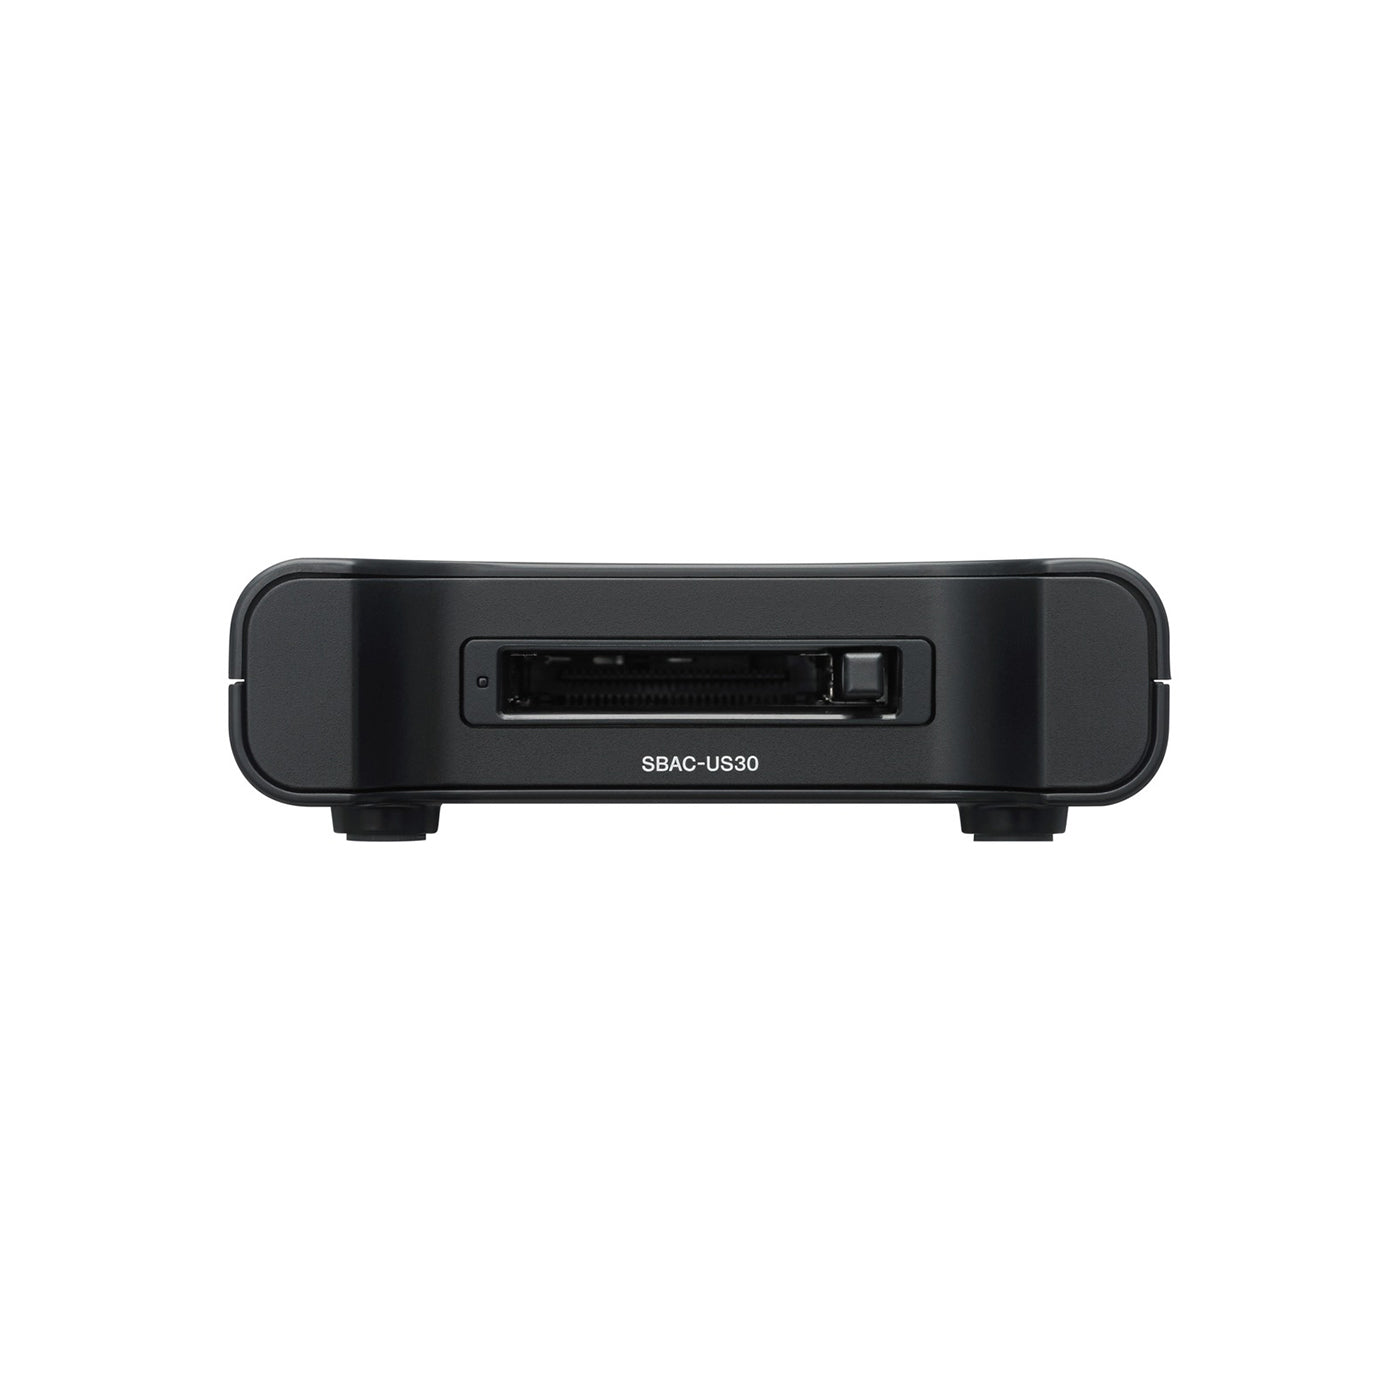 SBAC-US30 - SxS PRO+ and SxS-1 solid state memory USB 3.0 reader/writer